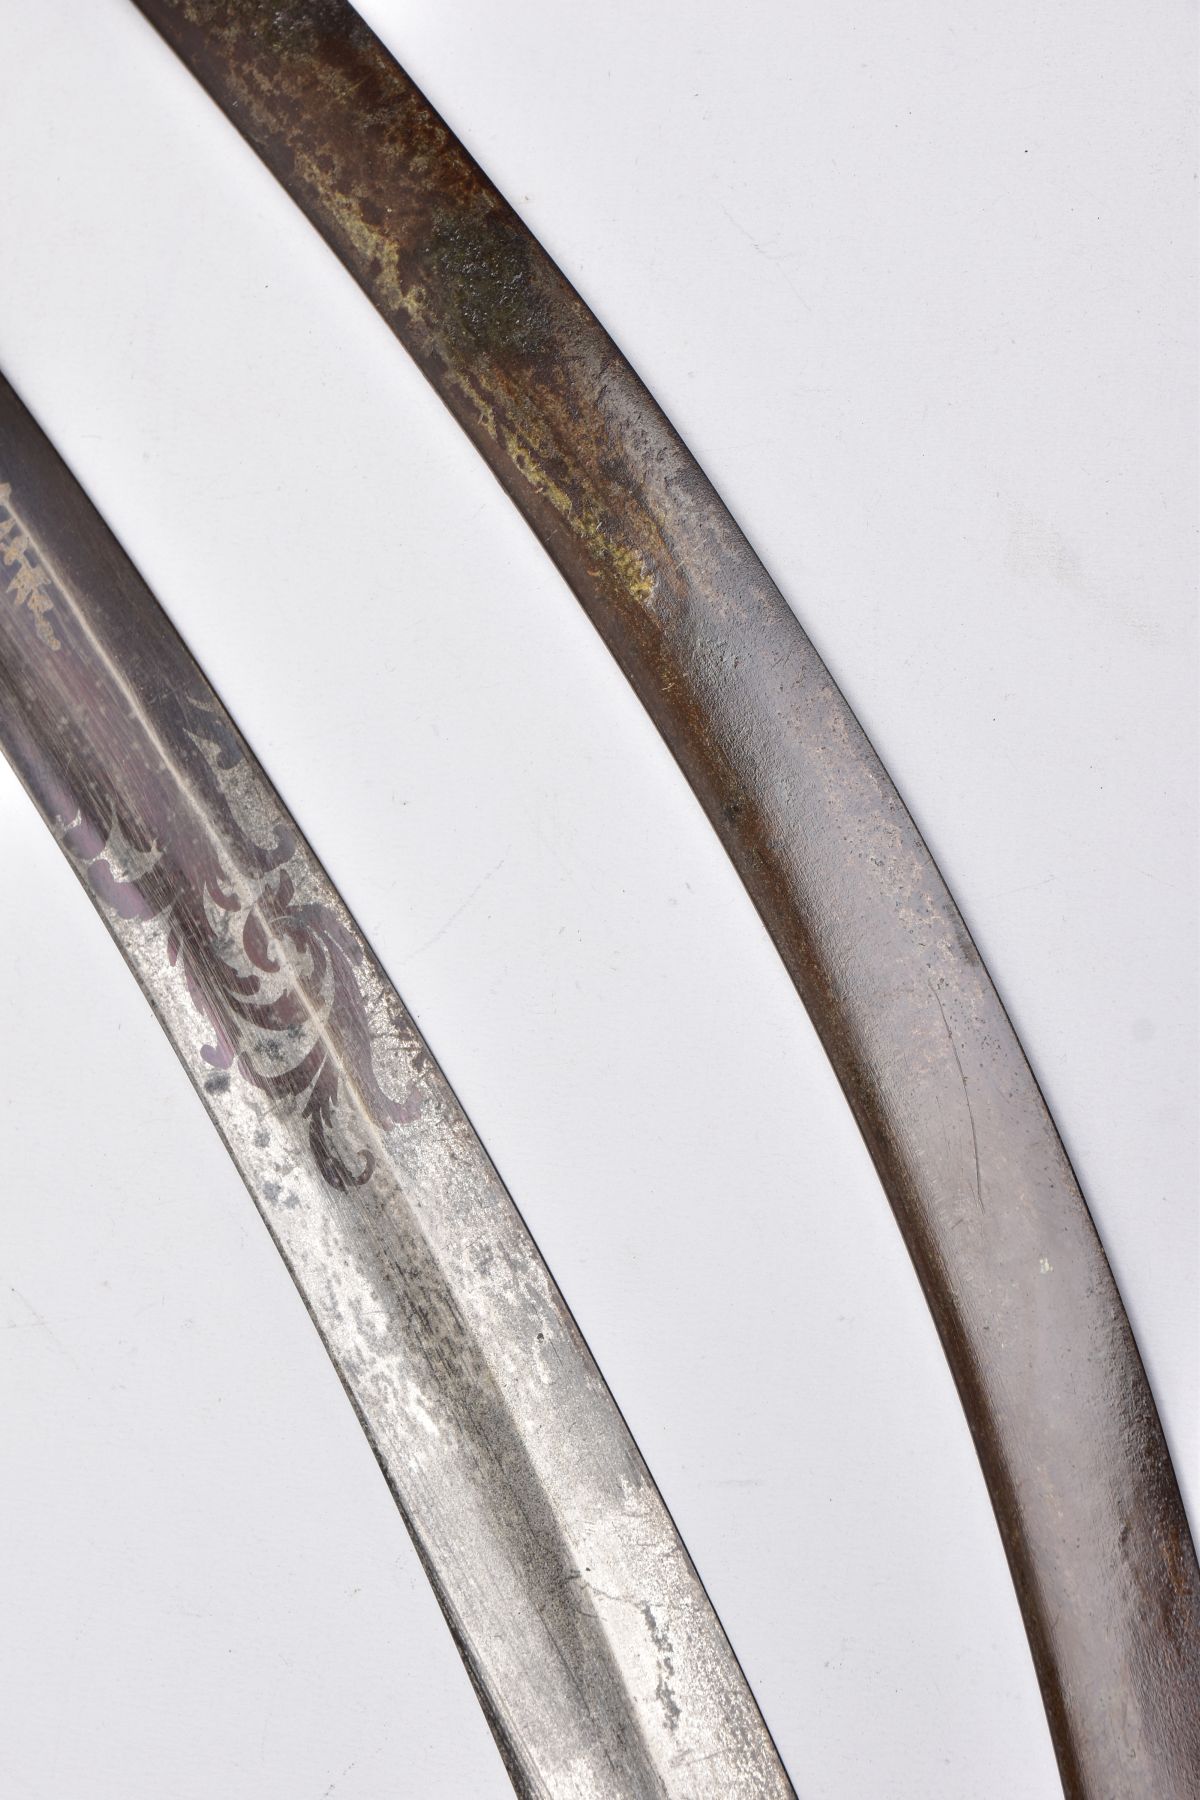 TWO LONG CURVED BLADE SWORDS, Eastern in design and looks, blade on one has been lacquered, etched - Image 5 of 10